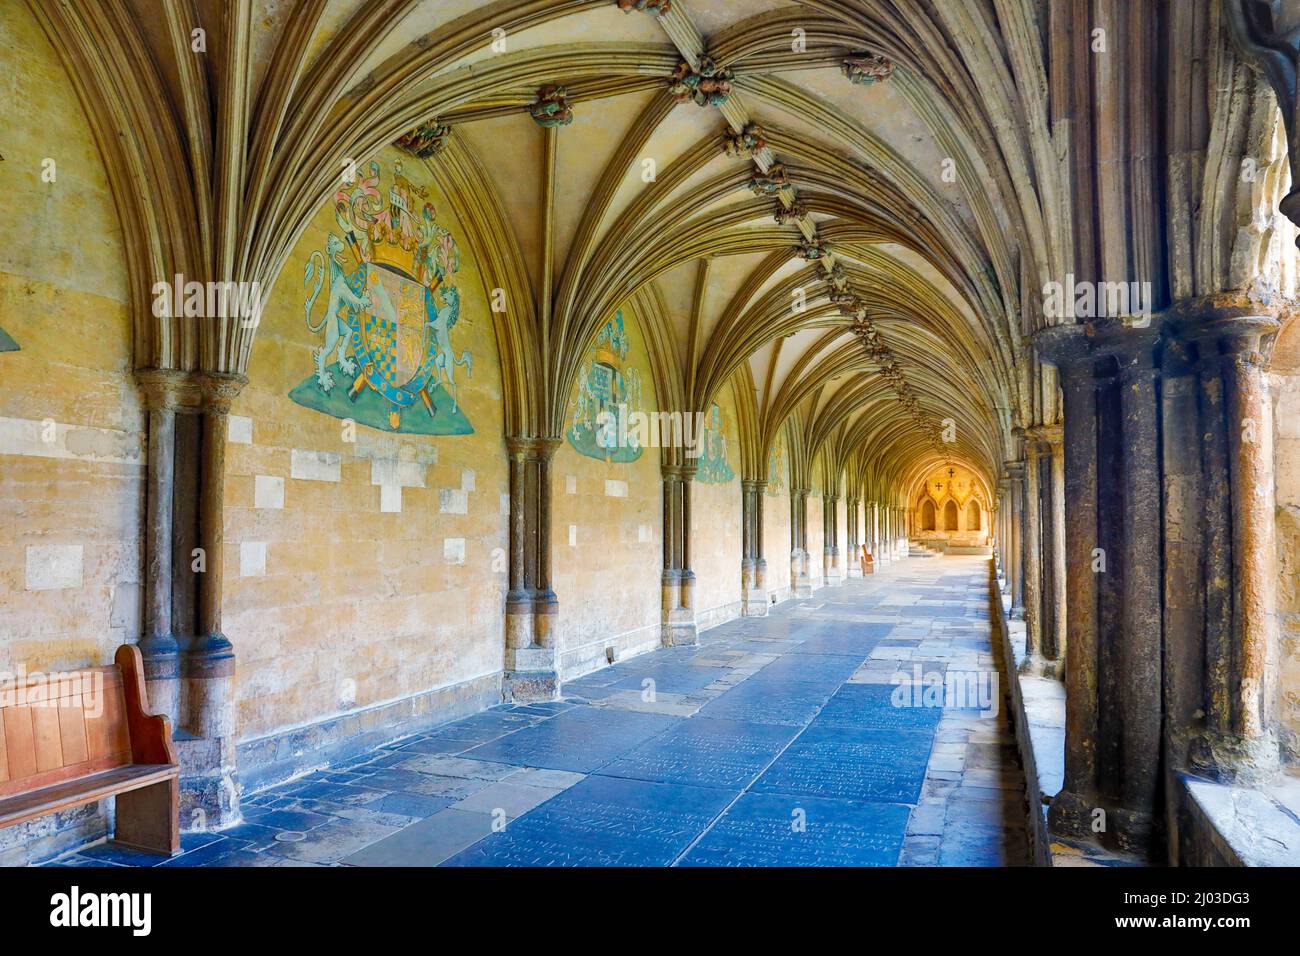 Cloisters at Norwich cathedral. Stock Photo